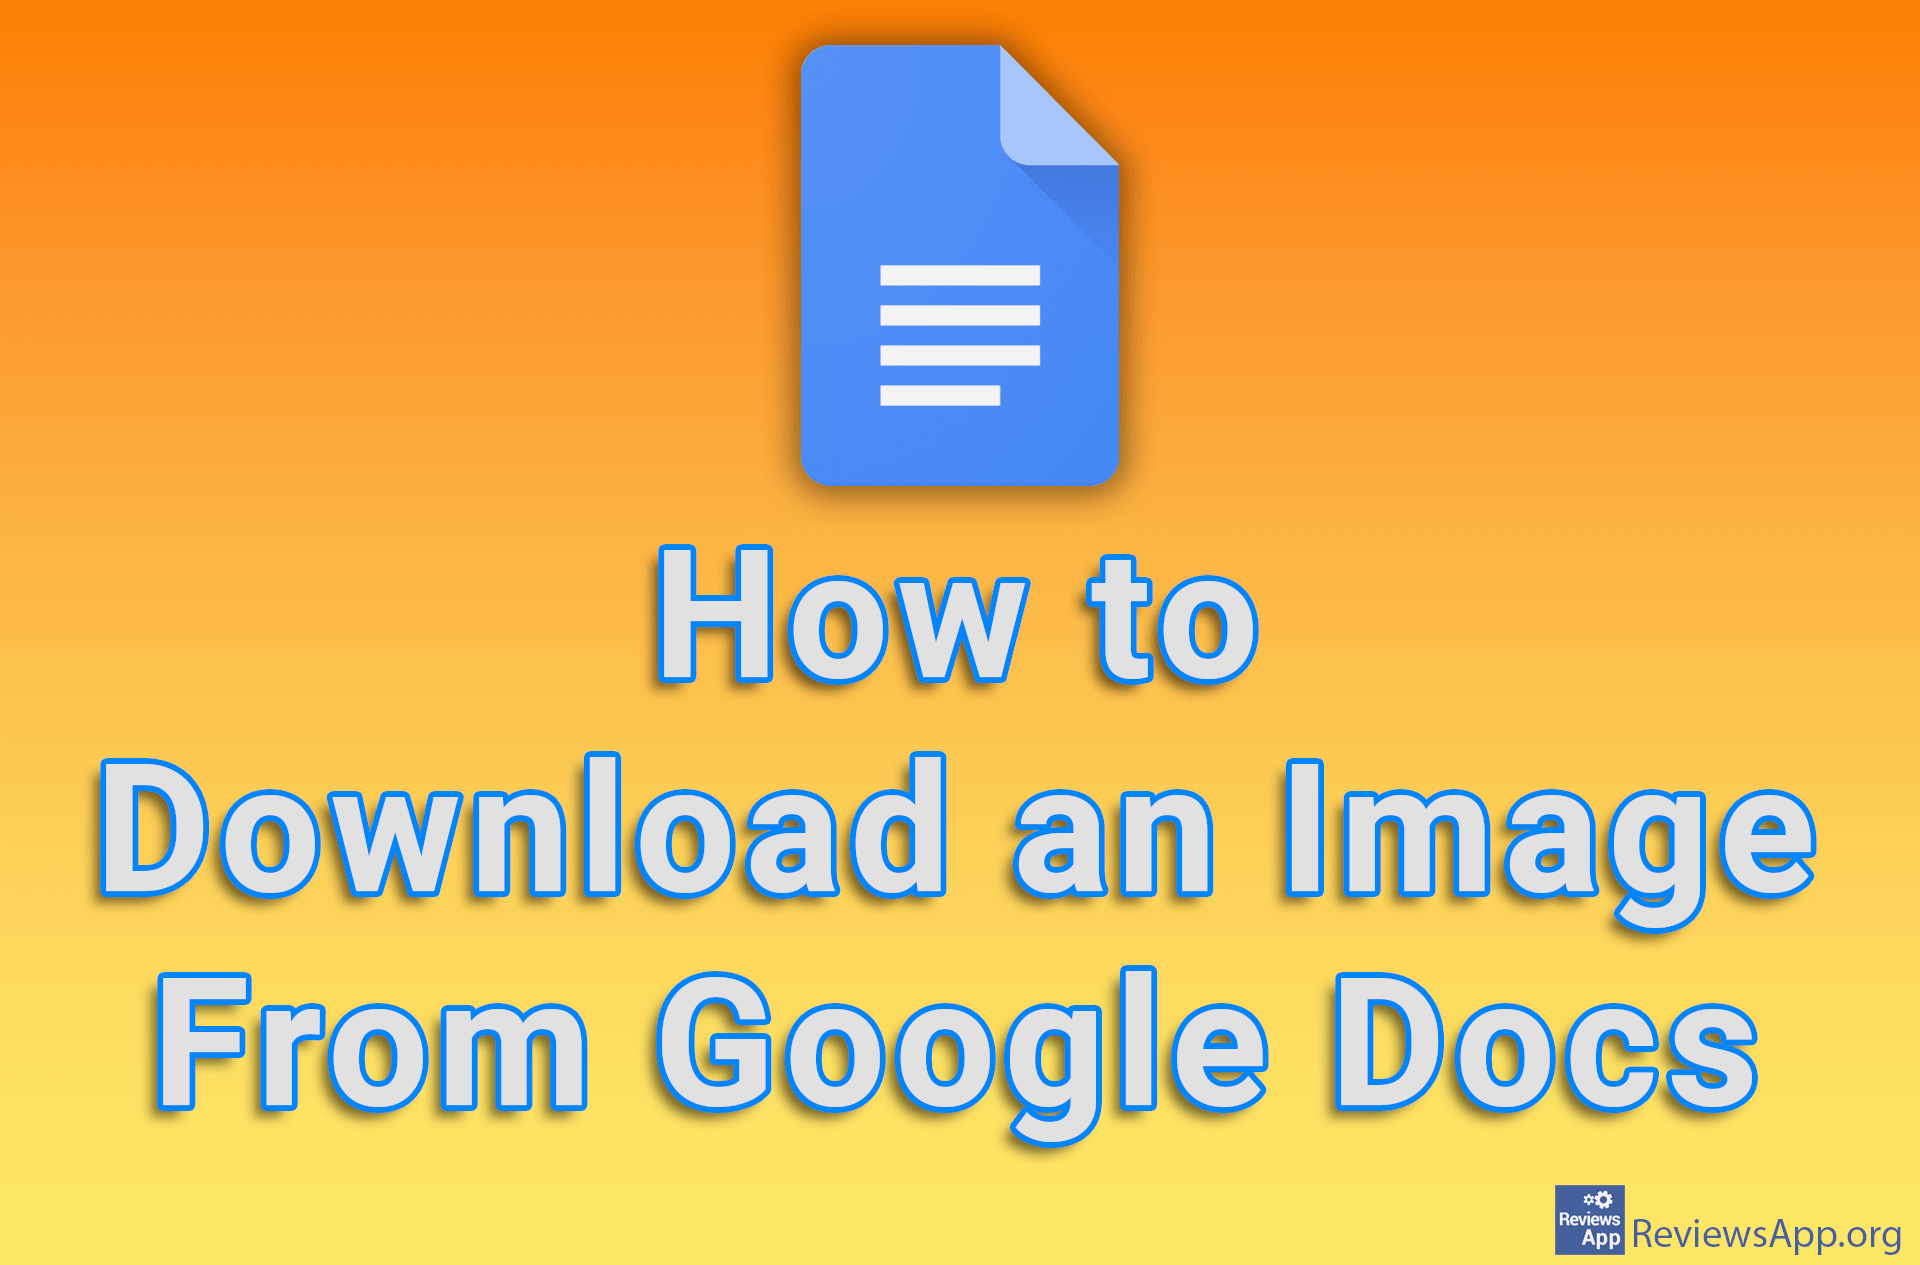 How to Download an Image From Google Docs